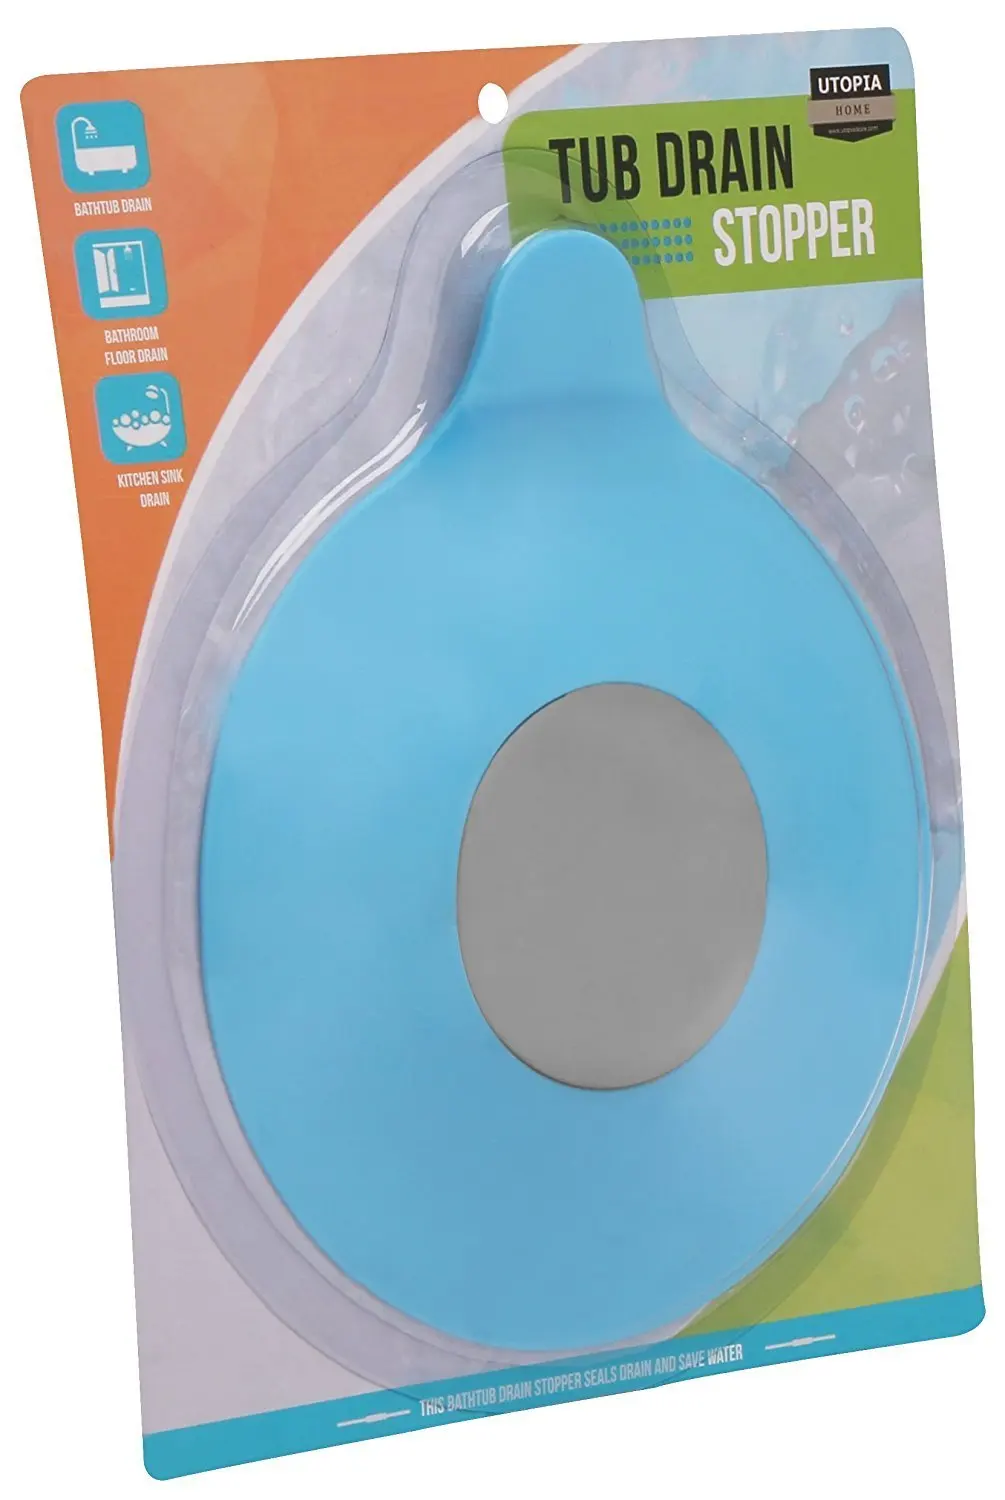 Cheap Tub Water Stopper Find Tub Water Stopper Deals On